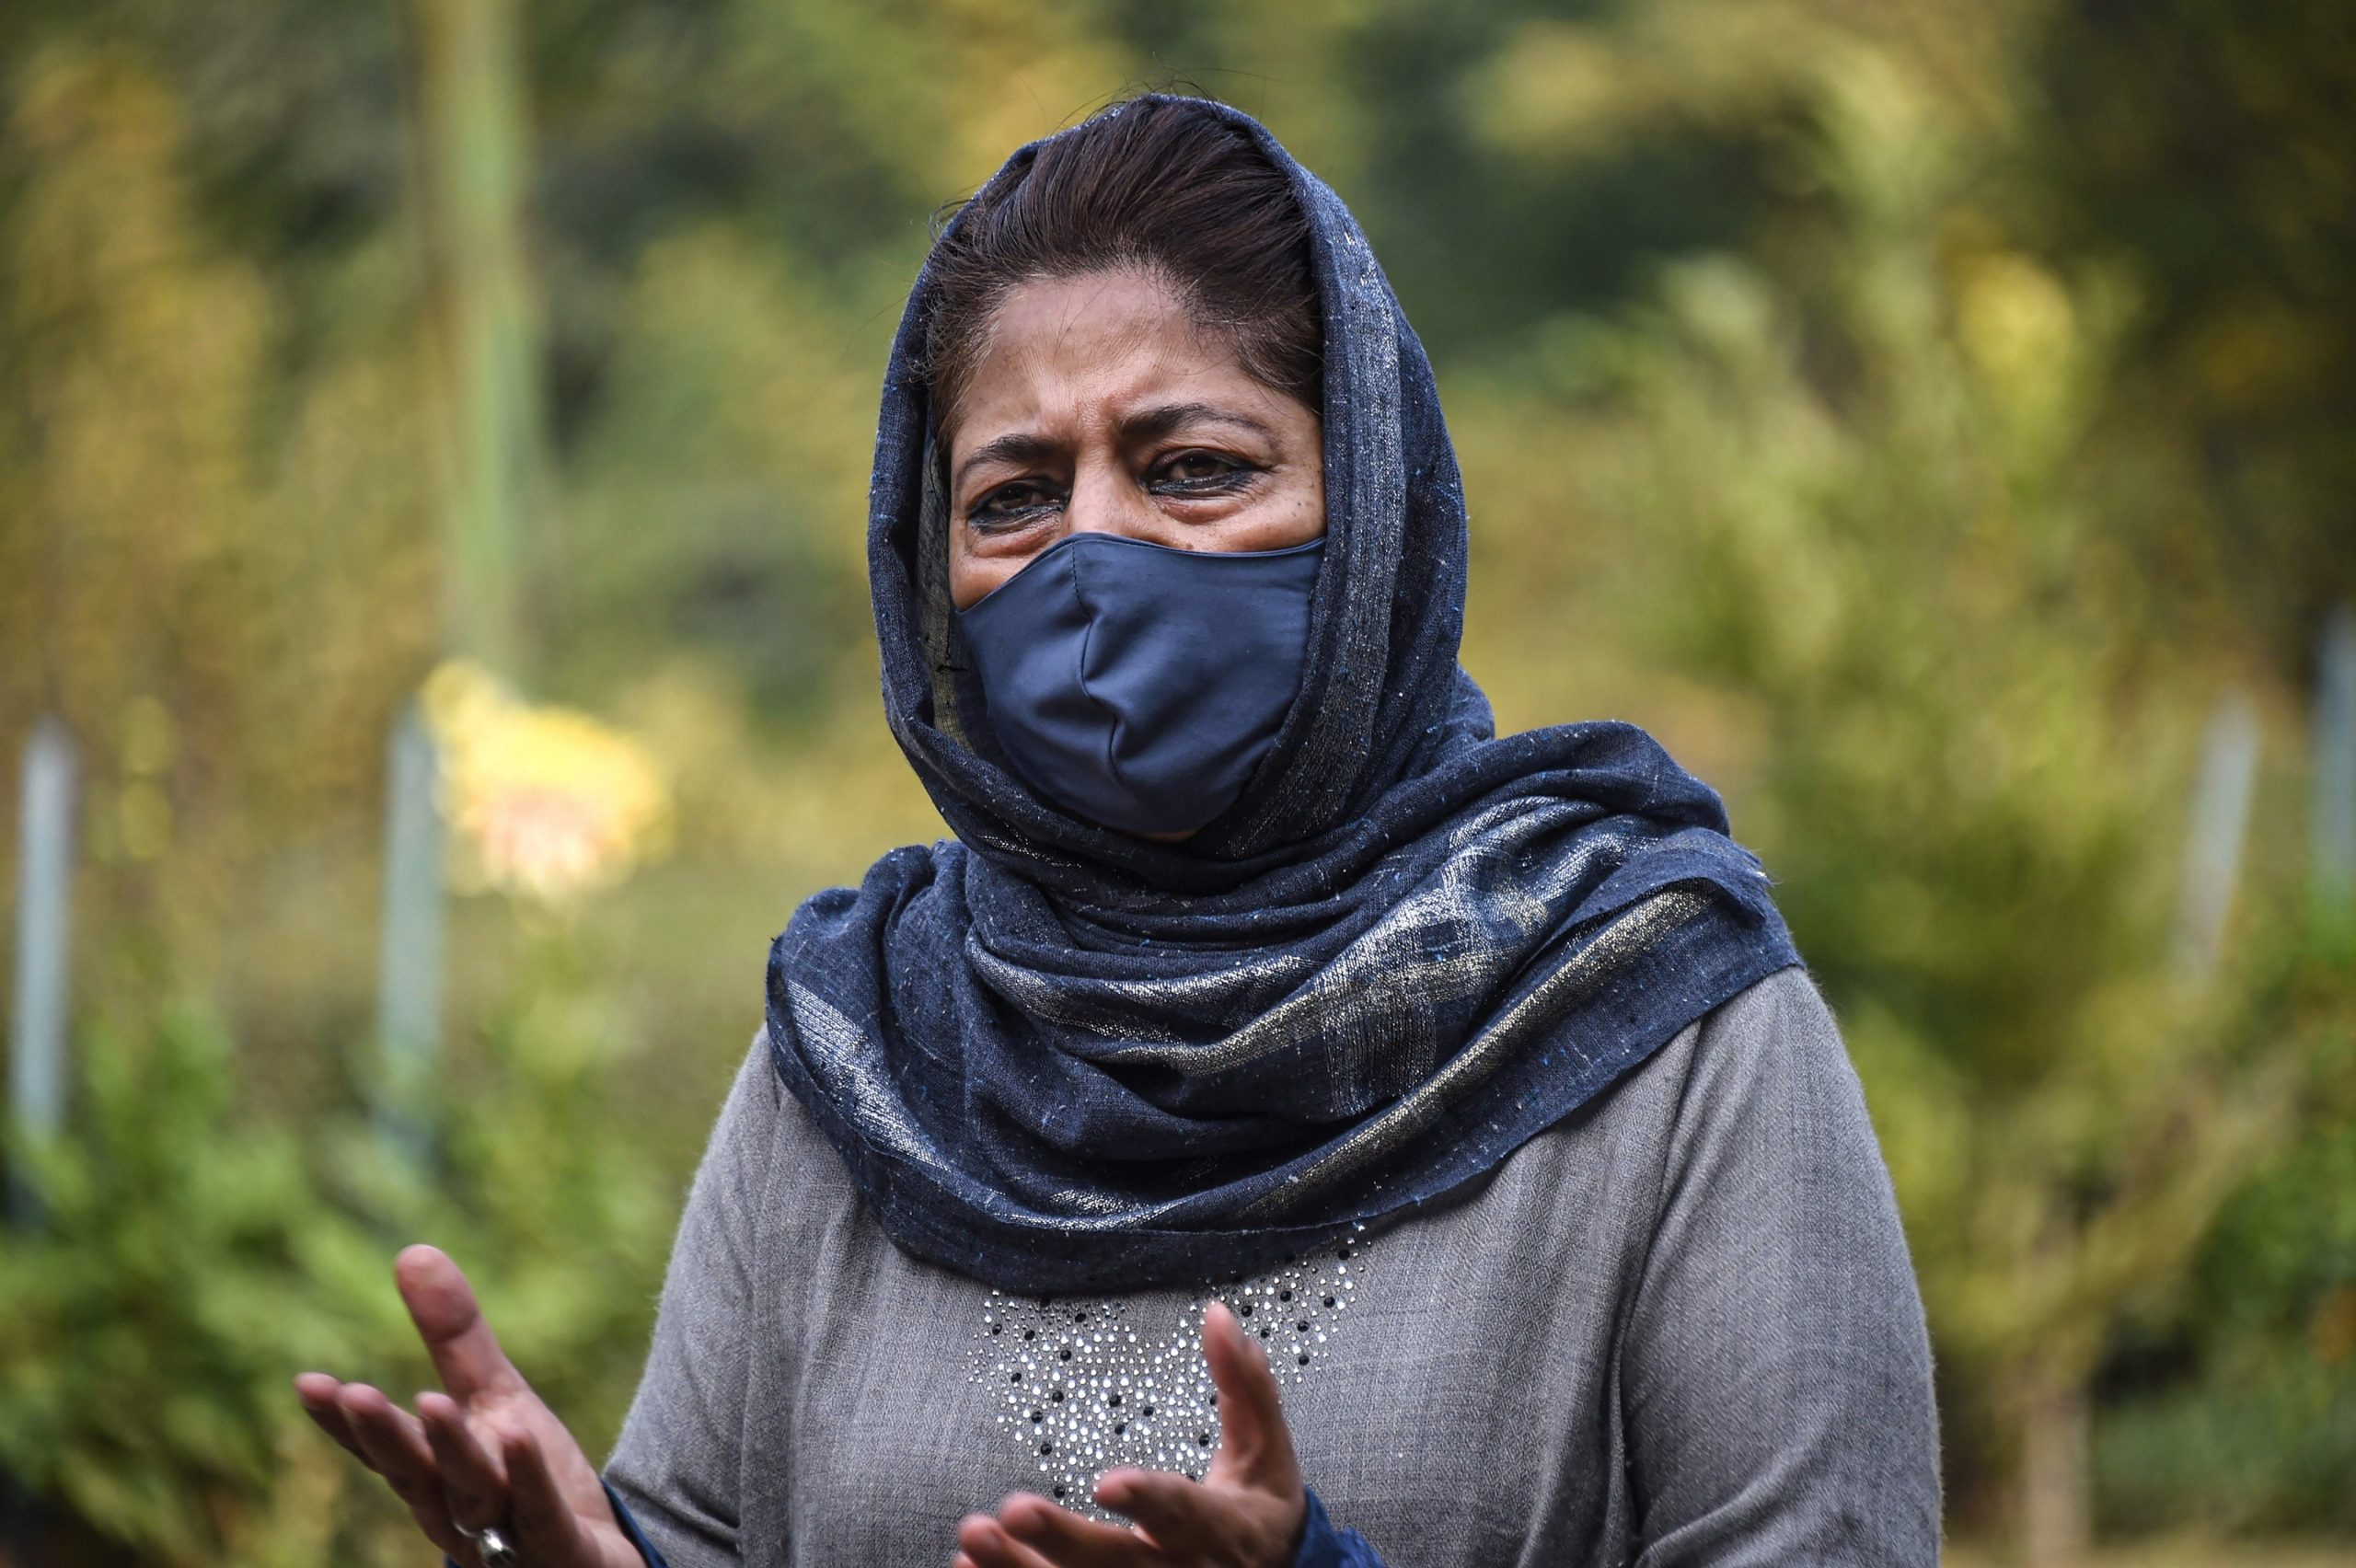 ‘Illegally detained, daughter under house arrest’, says Mehbooba Mufti